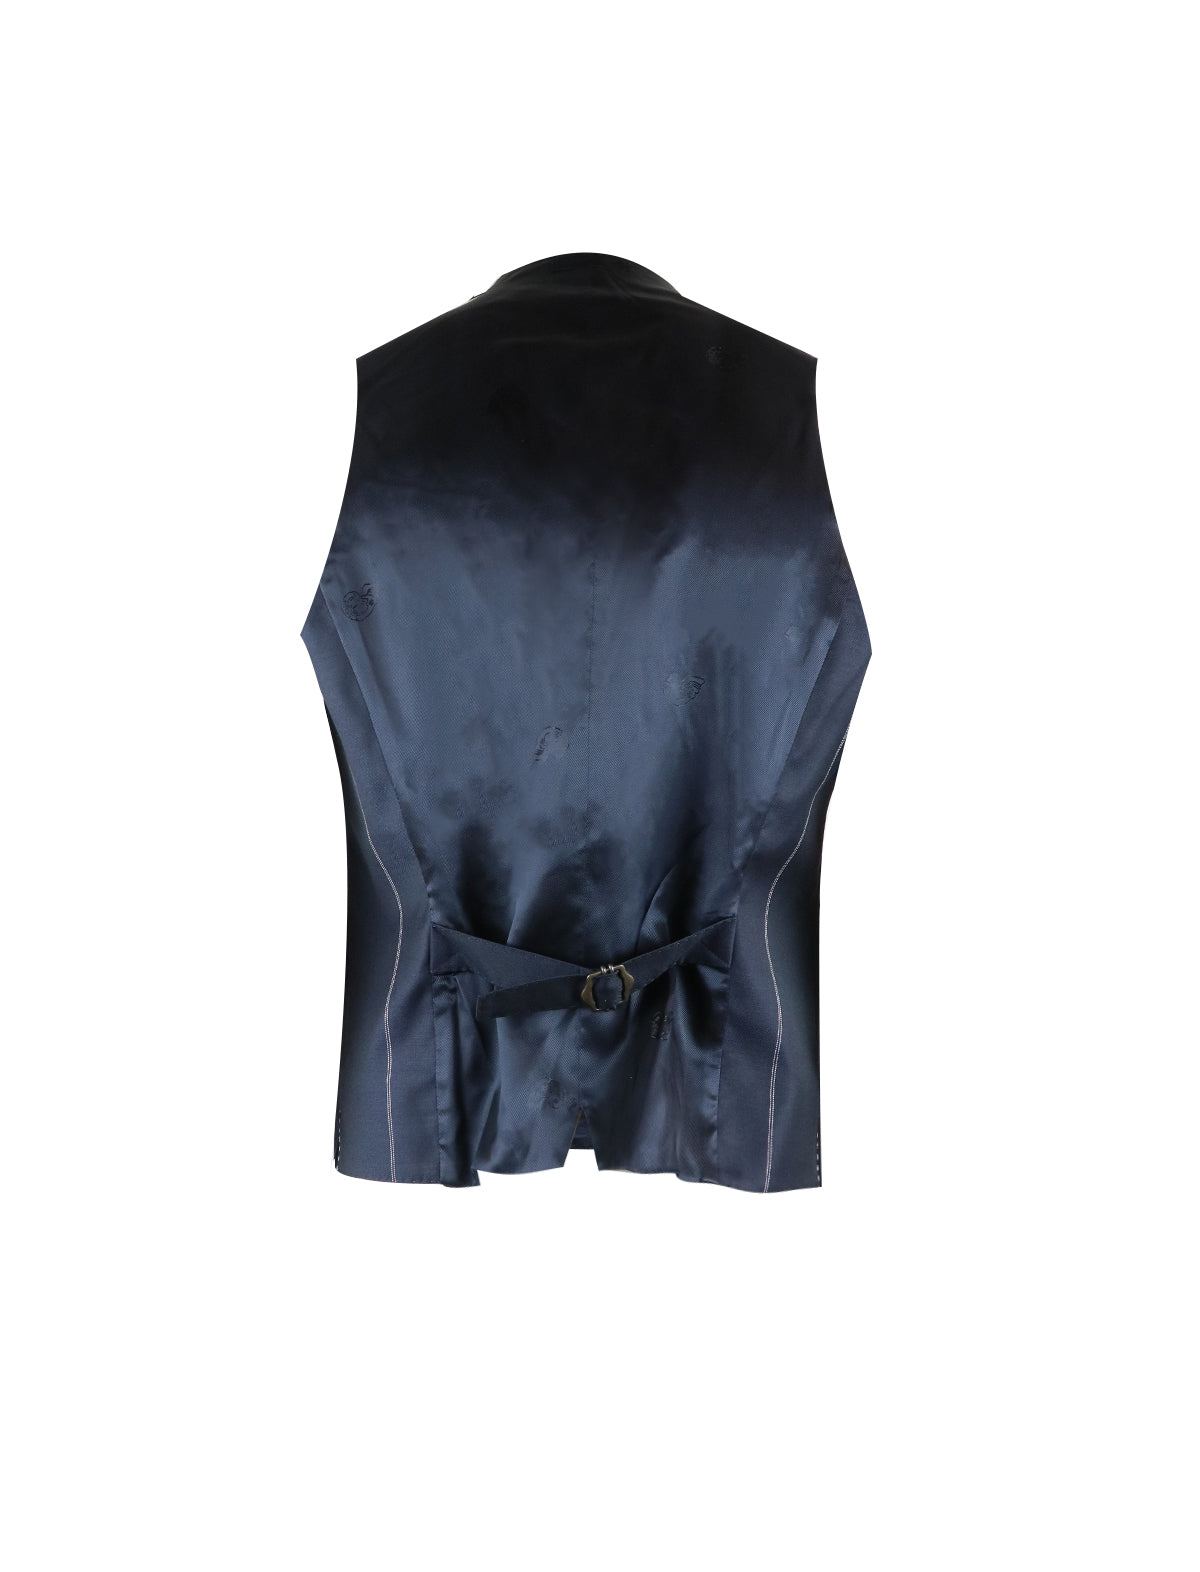 Gabriele Pasini Double-breasted Wool Vest in Navy/White Pinstripes